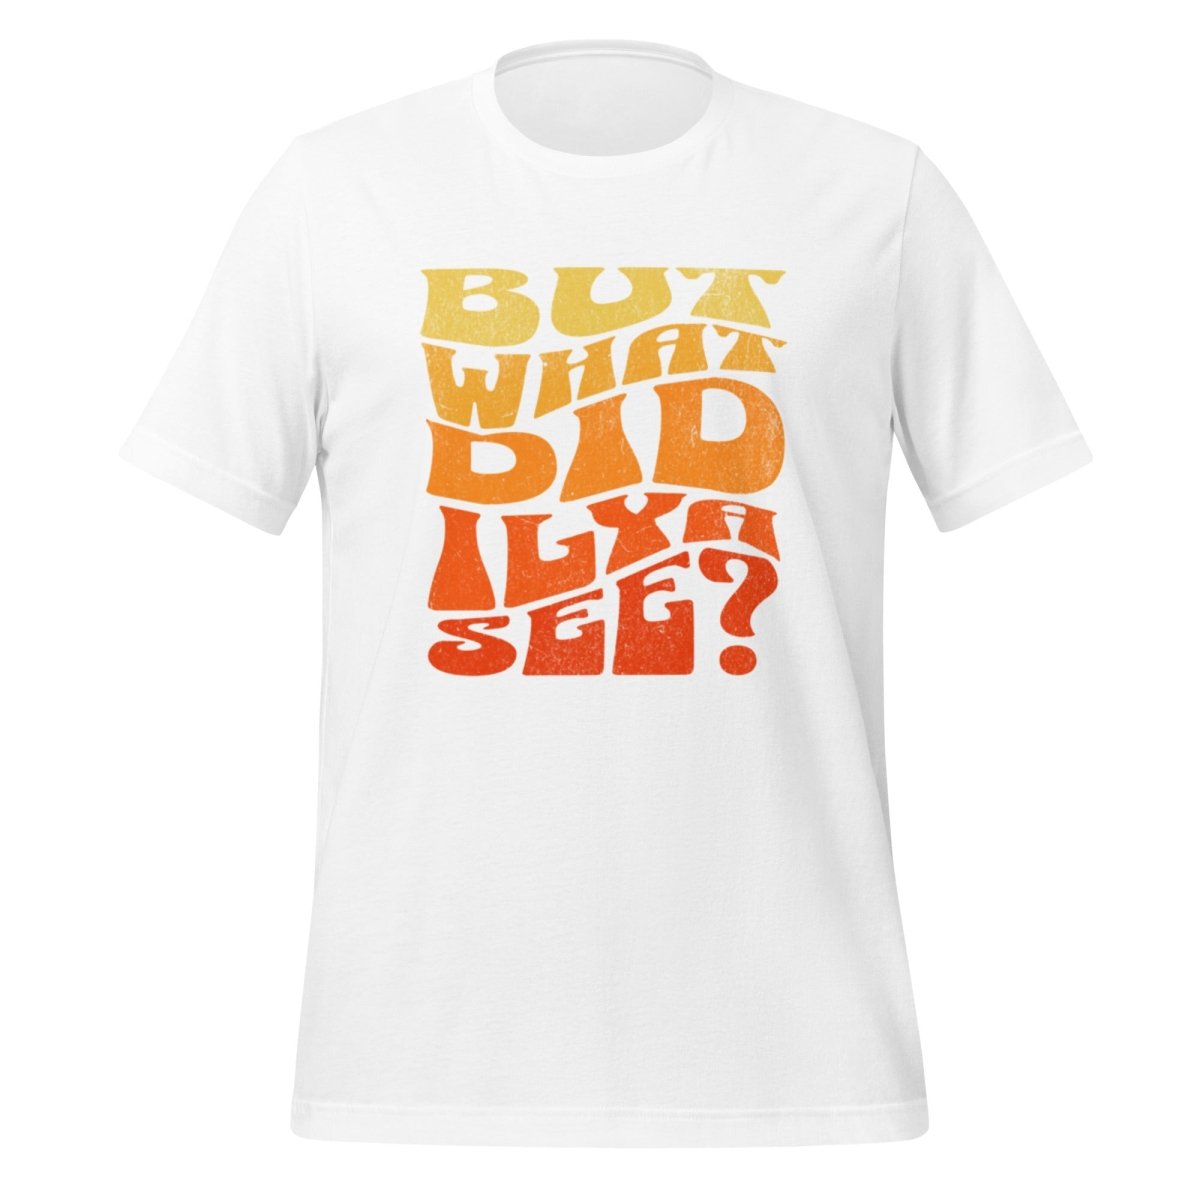 BUT WHAT DID ILYA SEE? T - Shirt (unisex) - White - AI Store